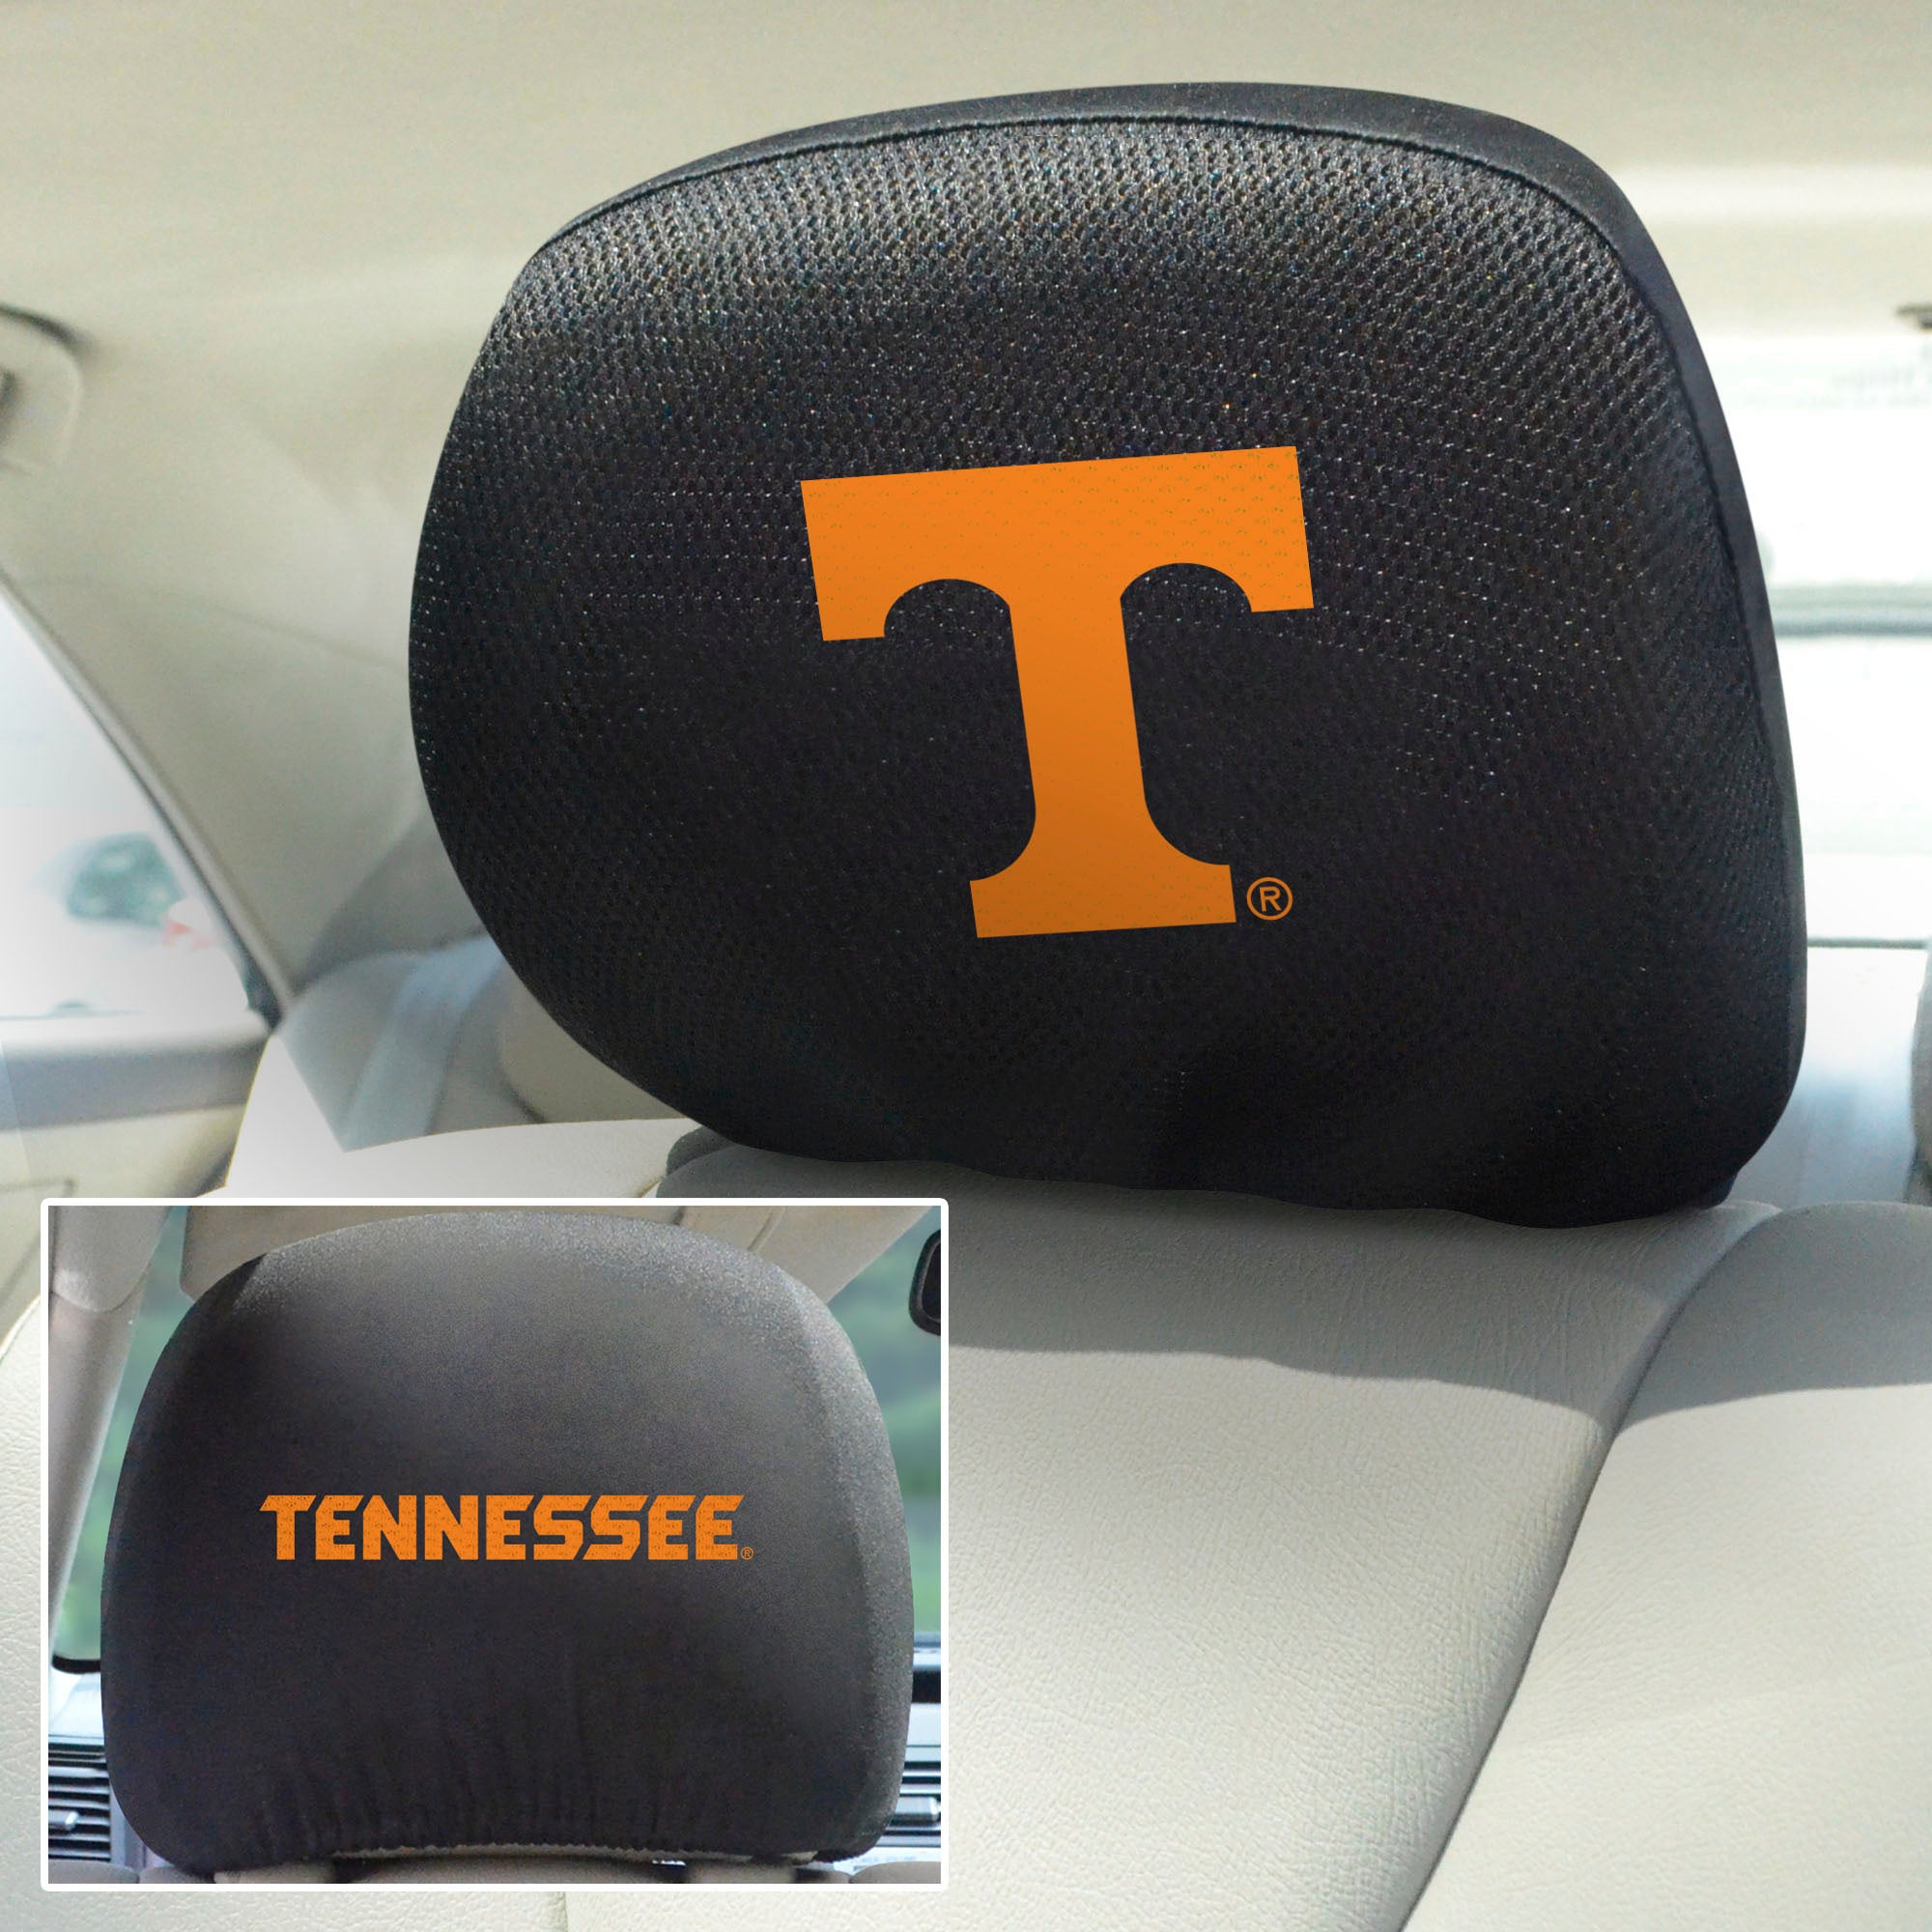 University of Tennessee Set of 2 Headrest Covers